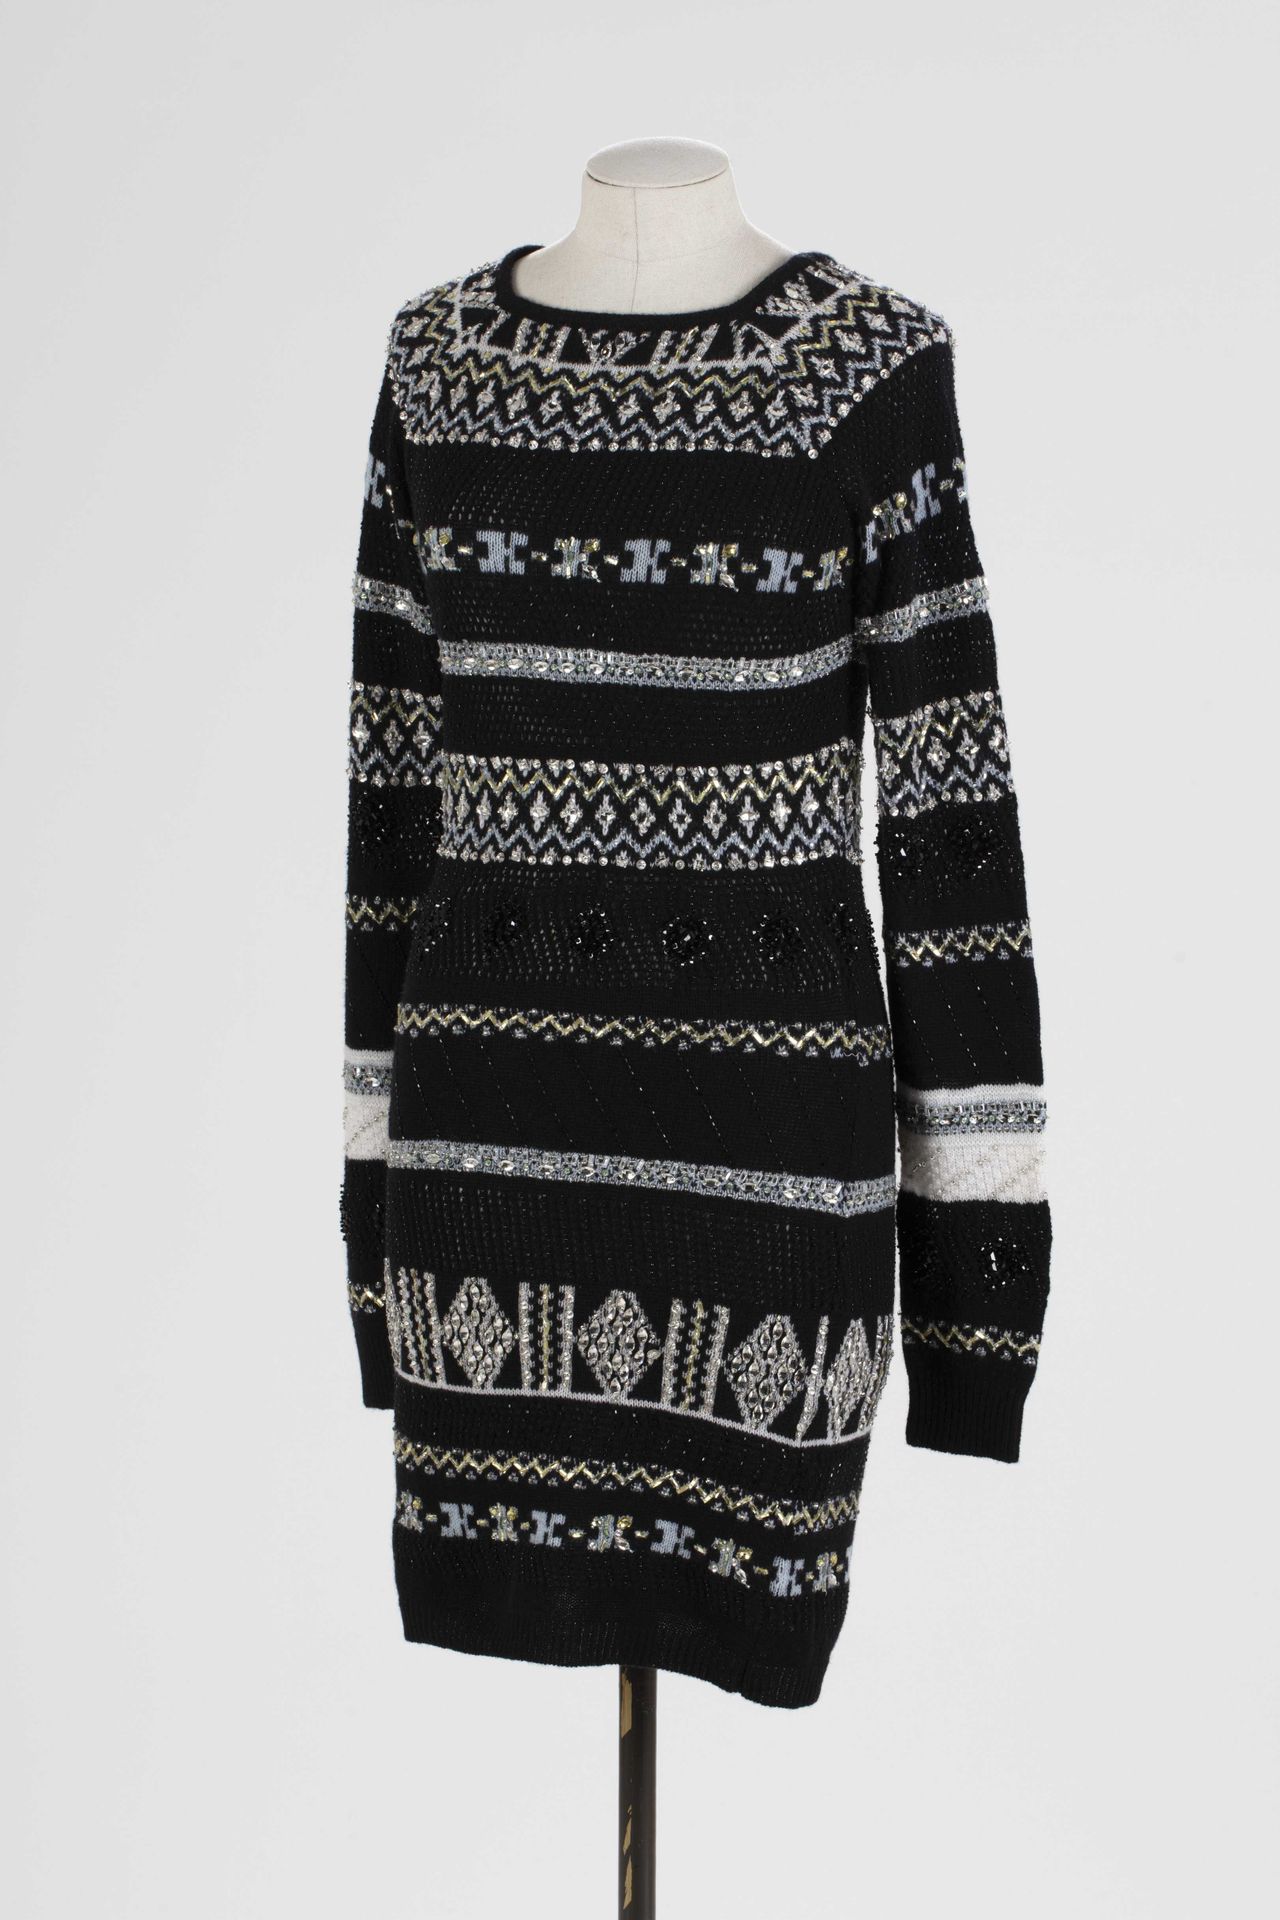 Null EMILIO PUCCI: black wool dress with white and grey jacquard embellished wit&hellip;